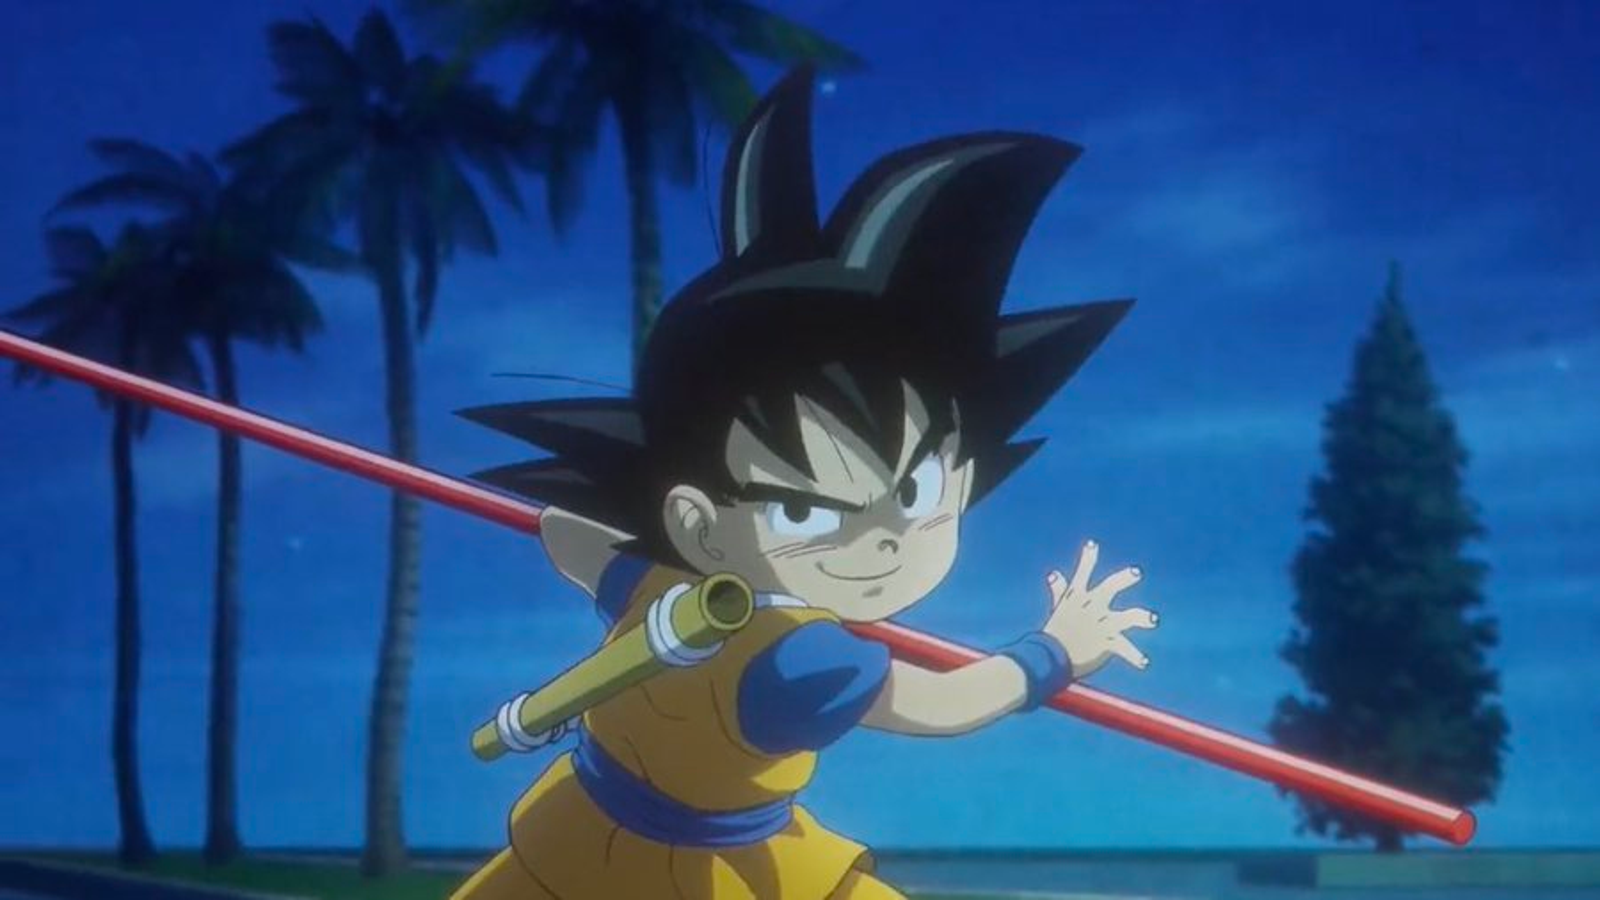 Dragon Ball Daima Announced at New York Comic-Con, Releases in Fall 2024